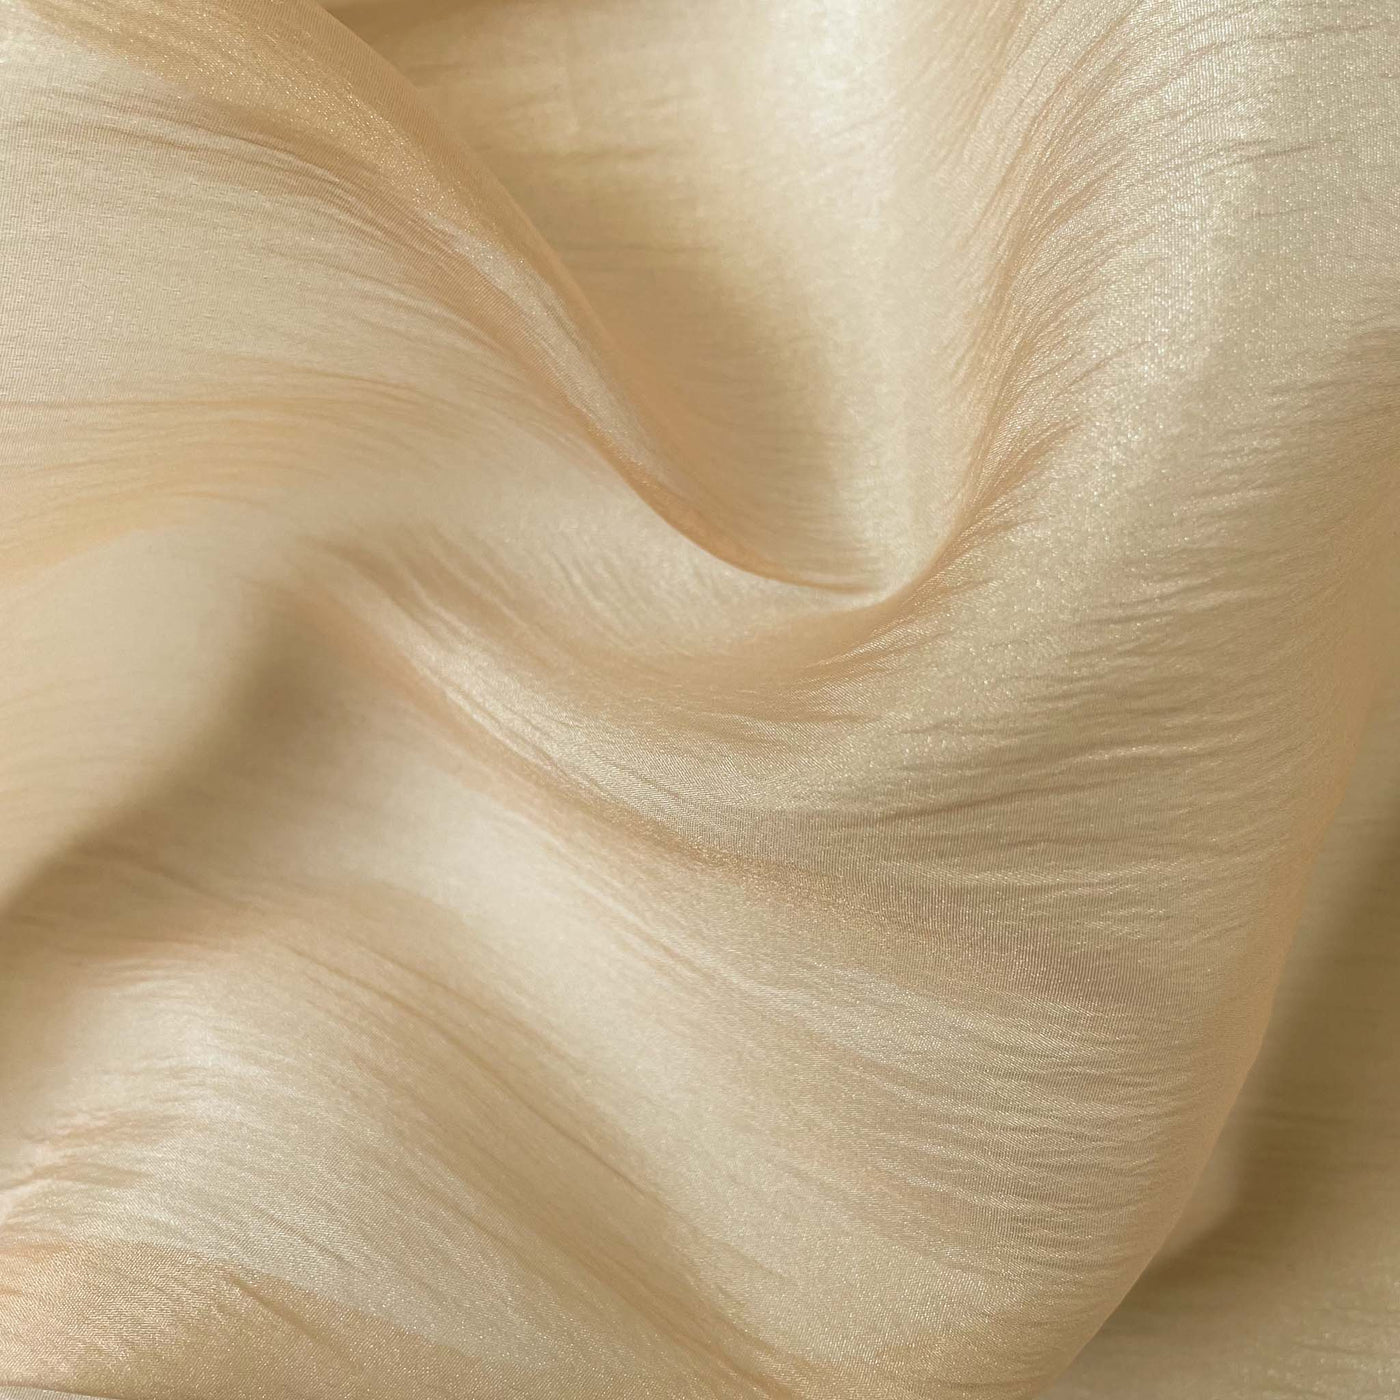 Fabric Pandit Fabric Shy Beige Plain Crinkle Organza Imported Fabric (Width 58 Inches)